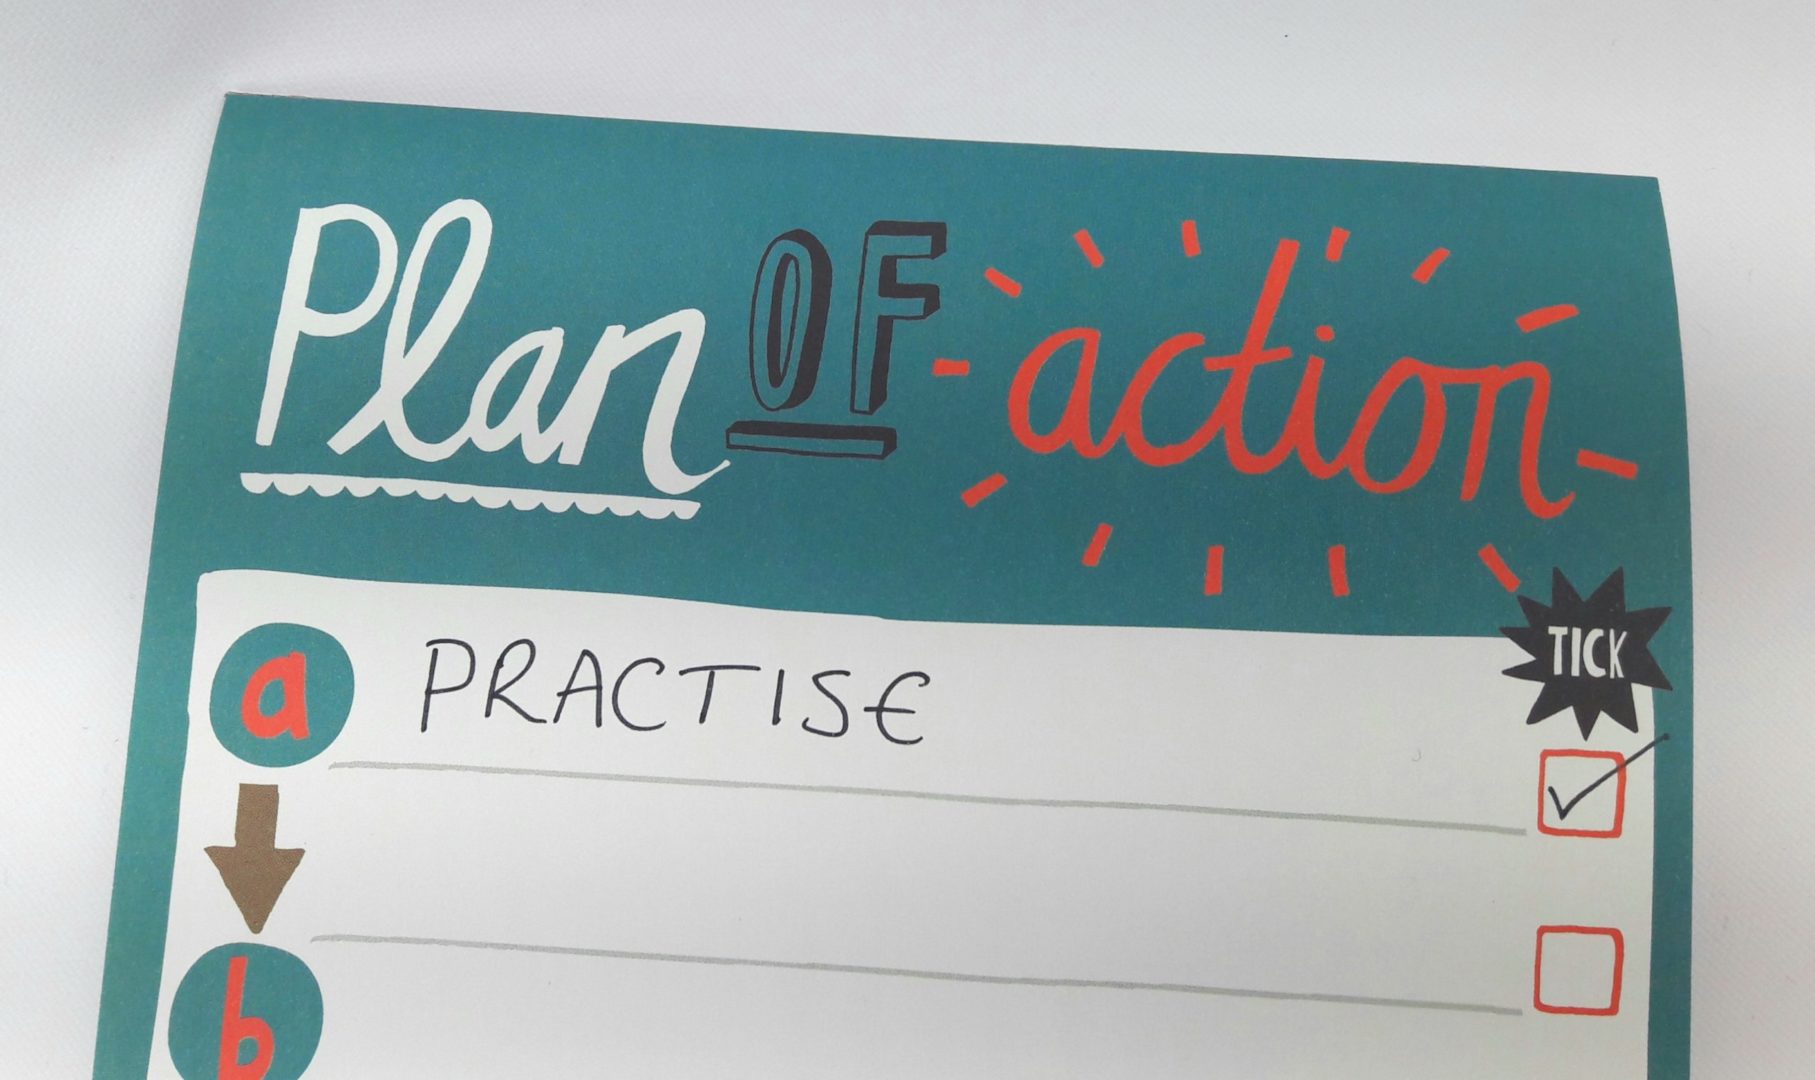 Image of a notepad with the words 'Plan of Action' and 'Practise' written on it